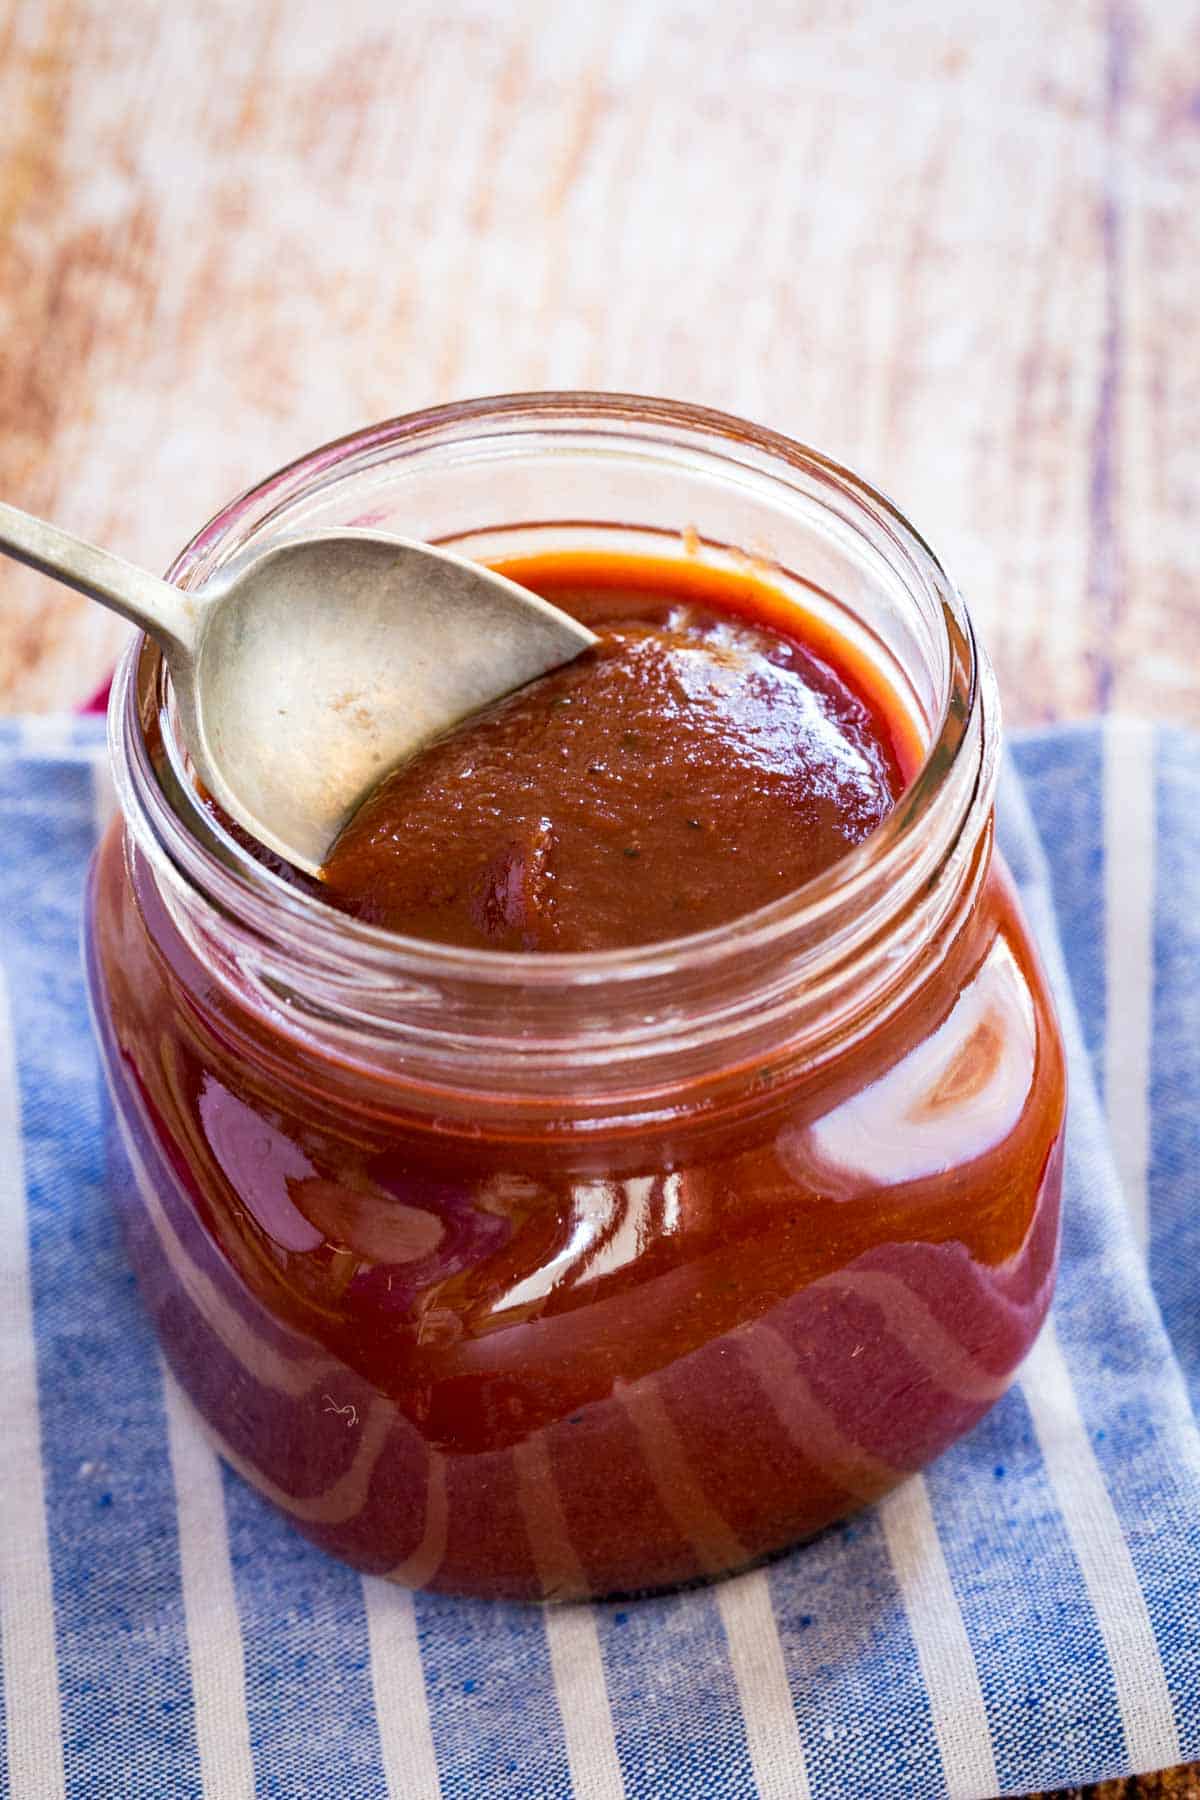 spoon scooping bourbon bbq sauce out of a glass jar